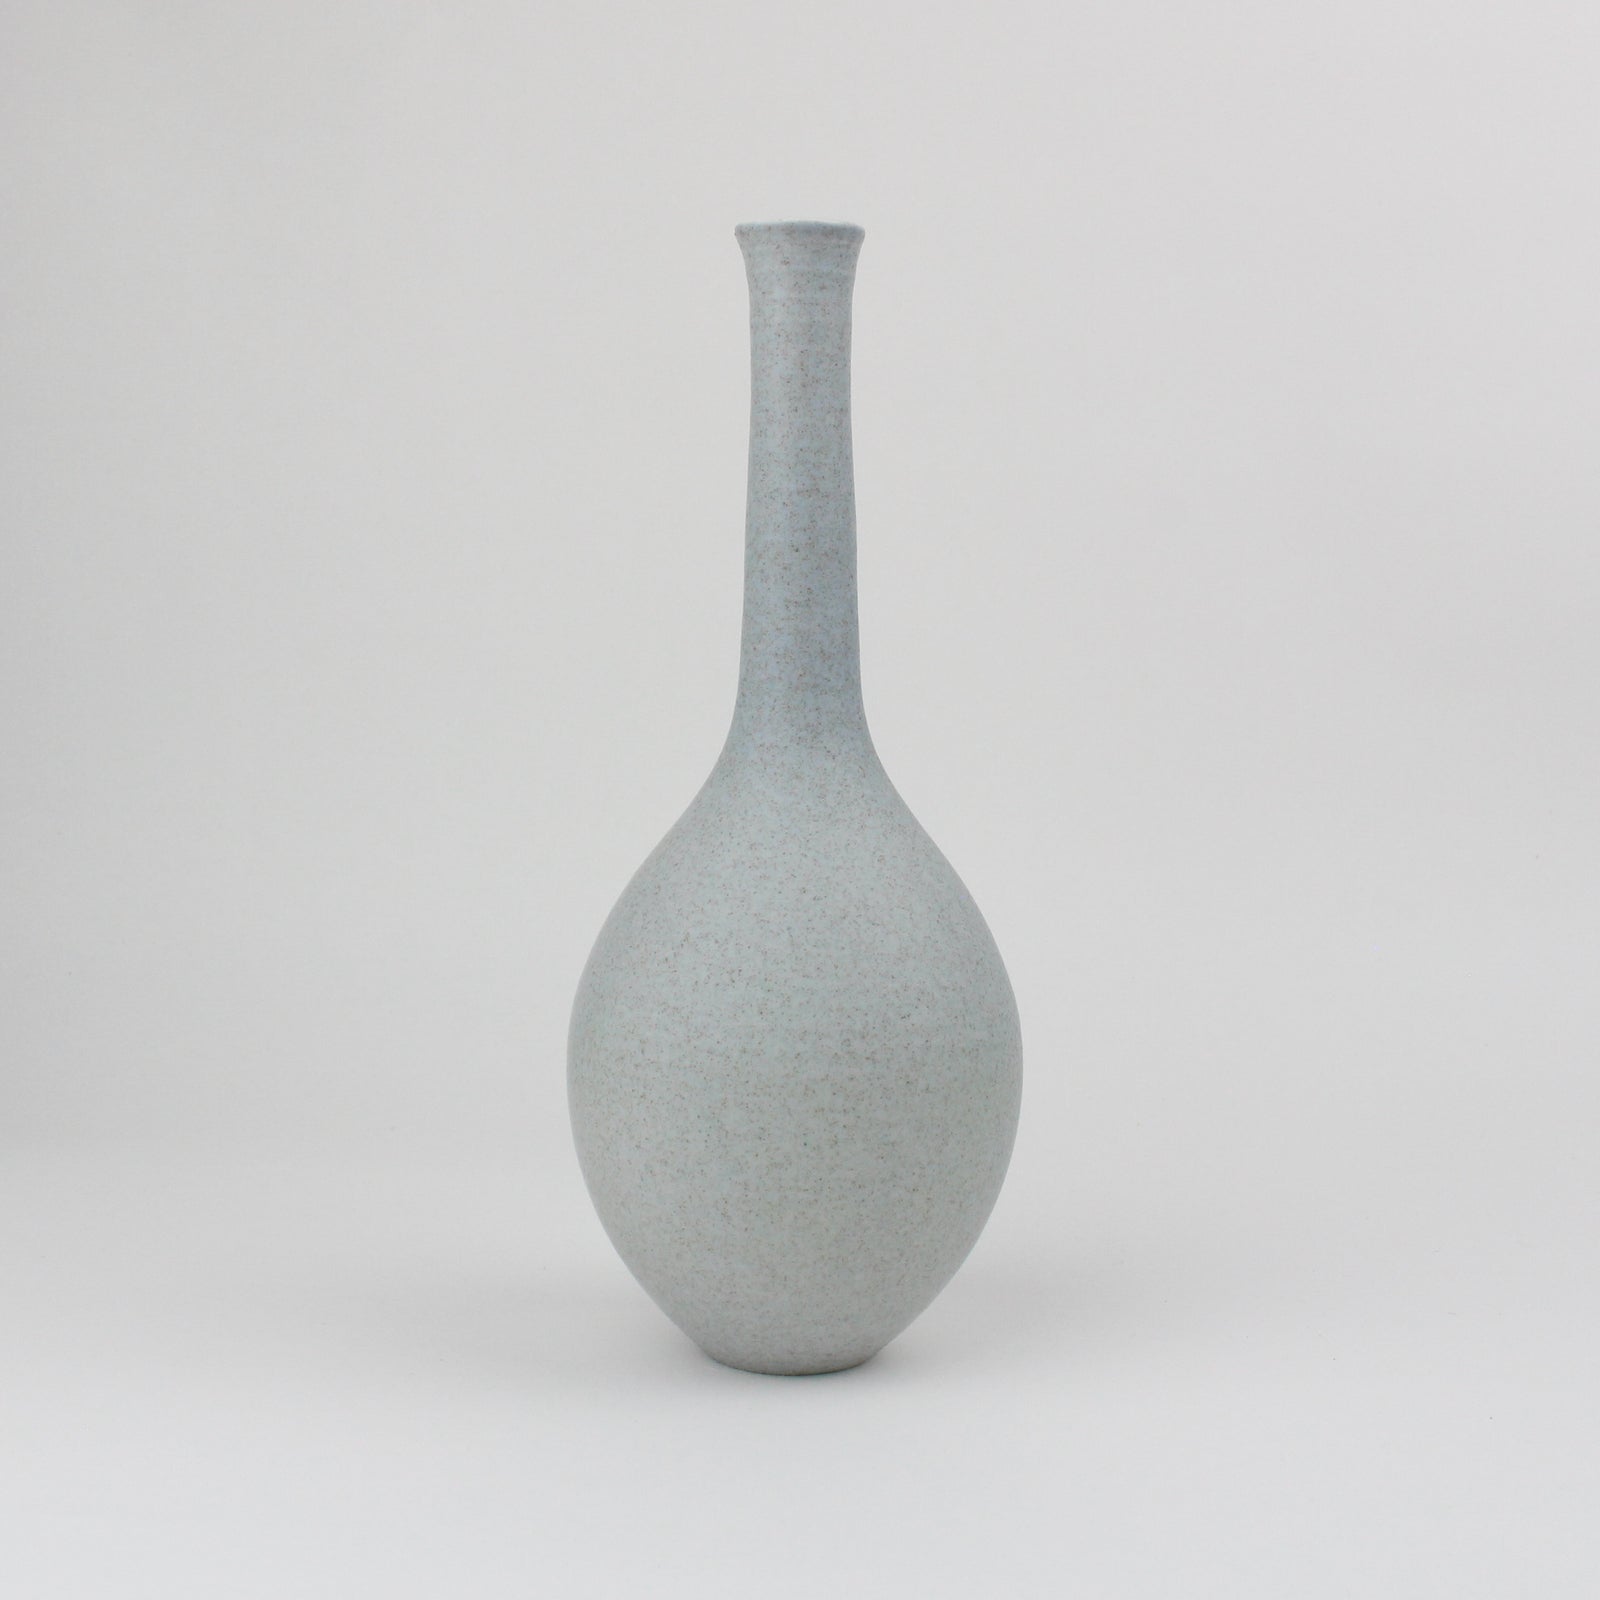 LB177 Pebble Grey Long-Necked Oval by Lucy Burley available at Padstow Gallery, Cornwall